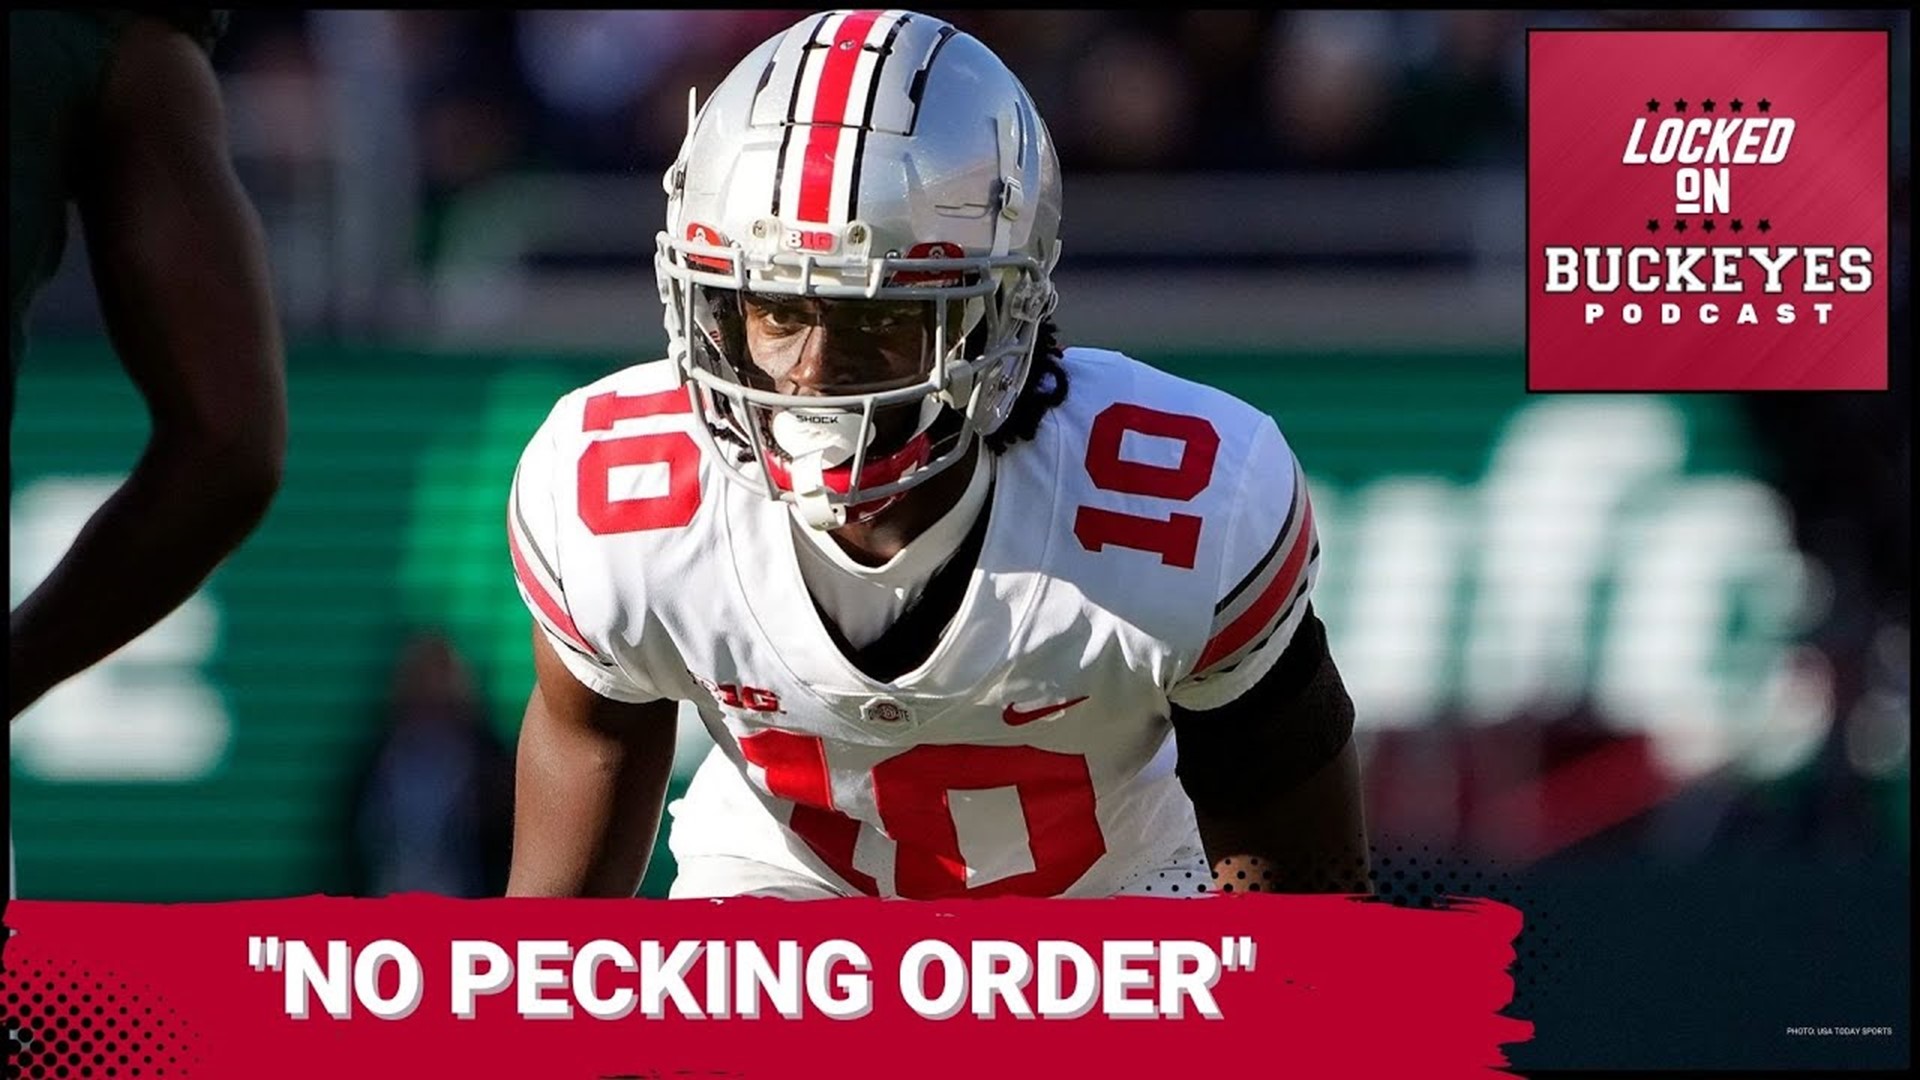 Denzel Burke is expected to be a leader in the Buckeye secondary this season as Ohio State needs a steady player on the outside.